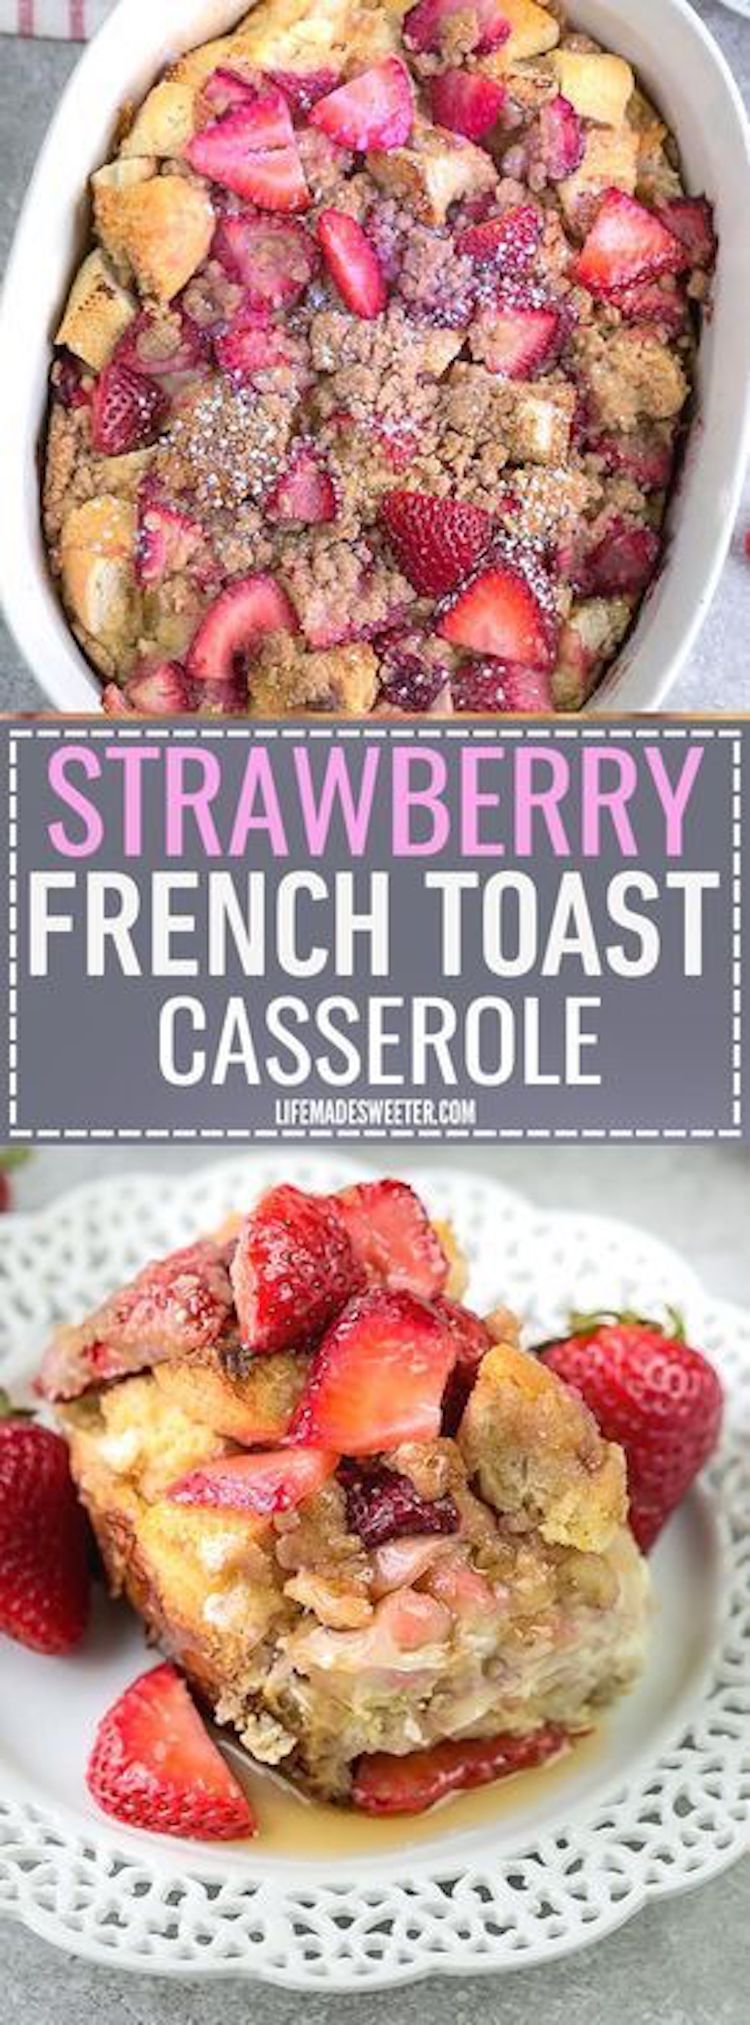 Easy Strawberry French Toast